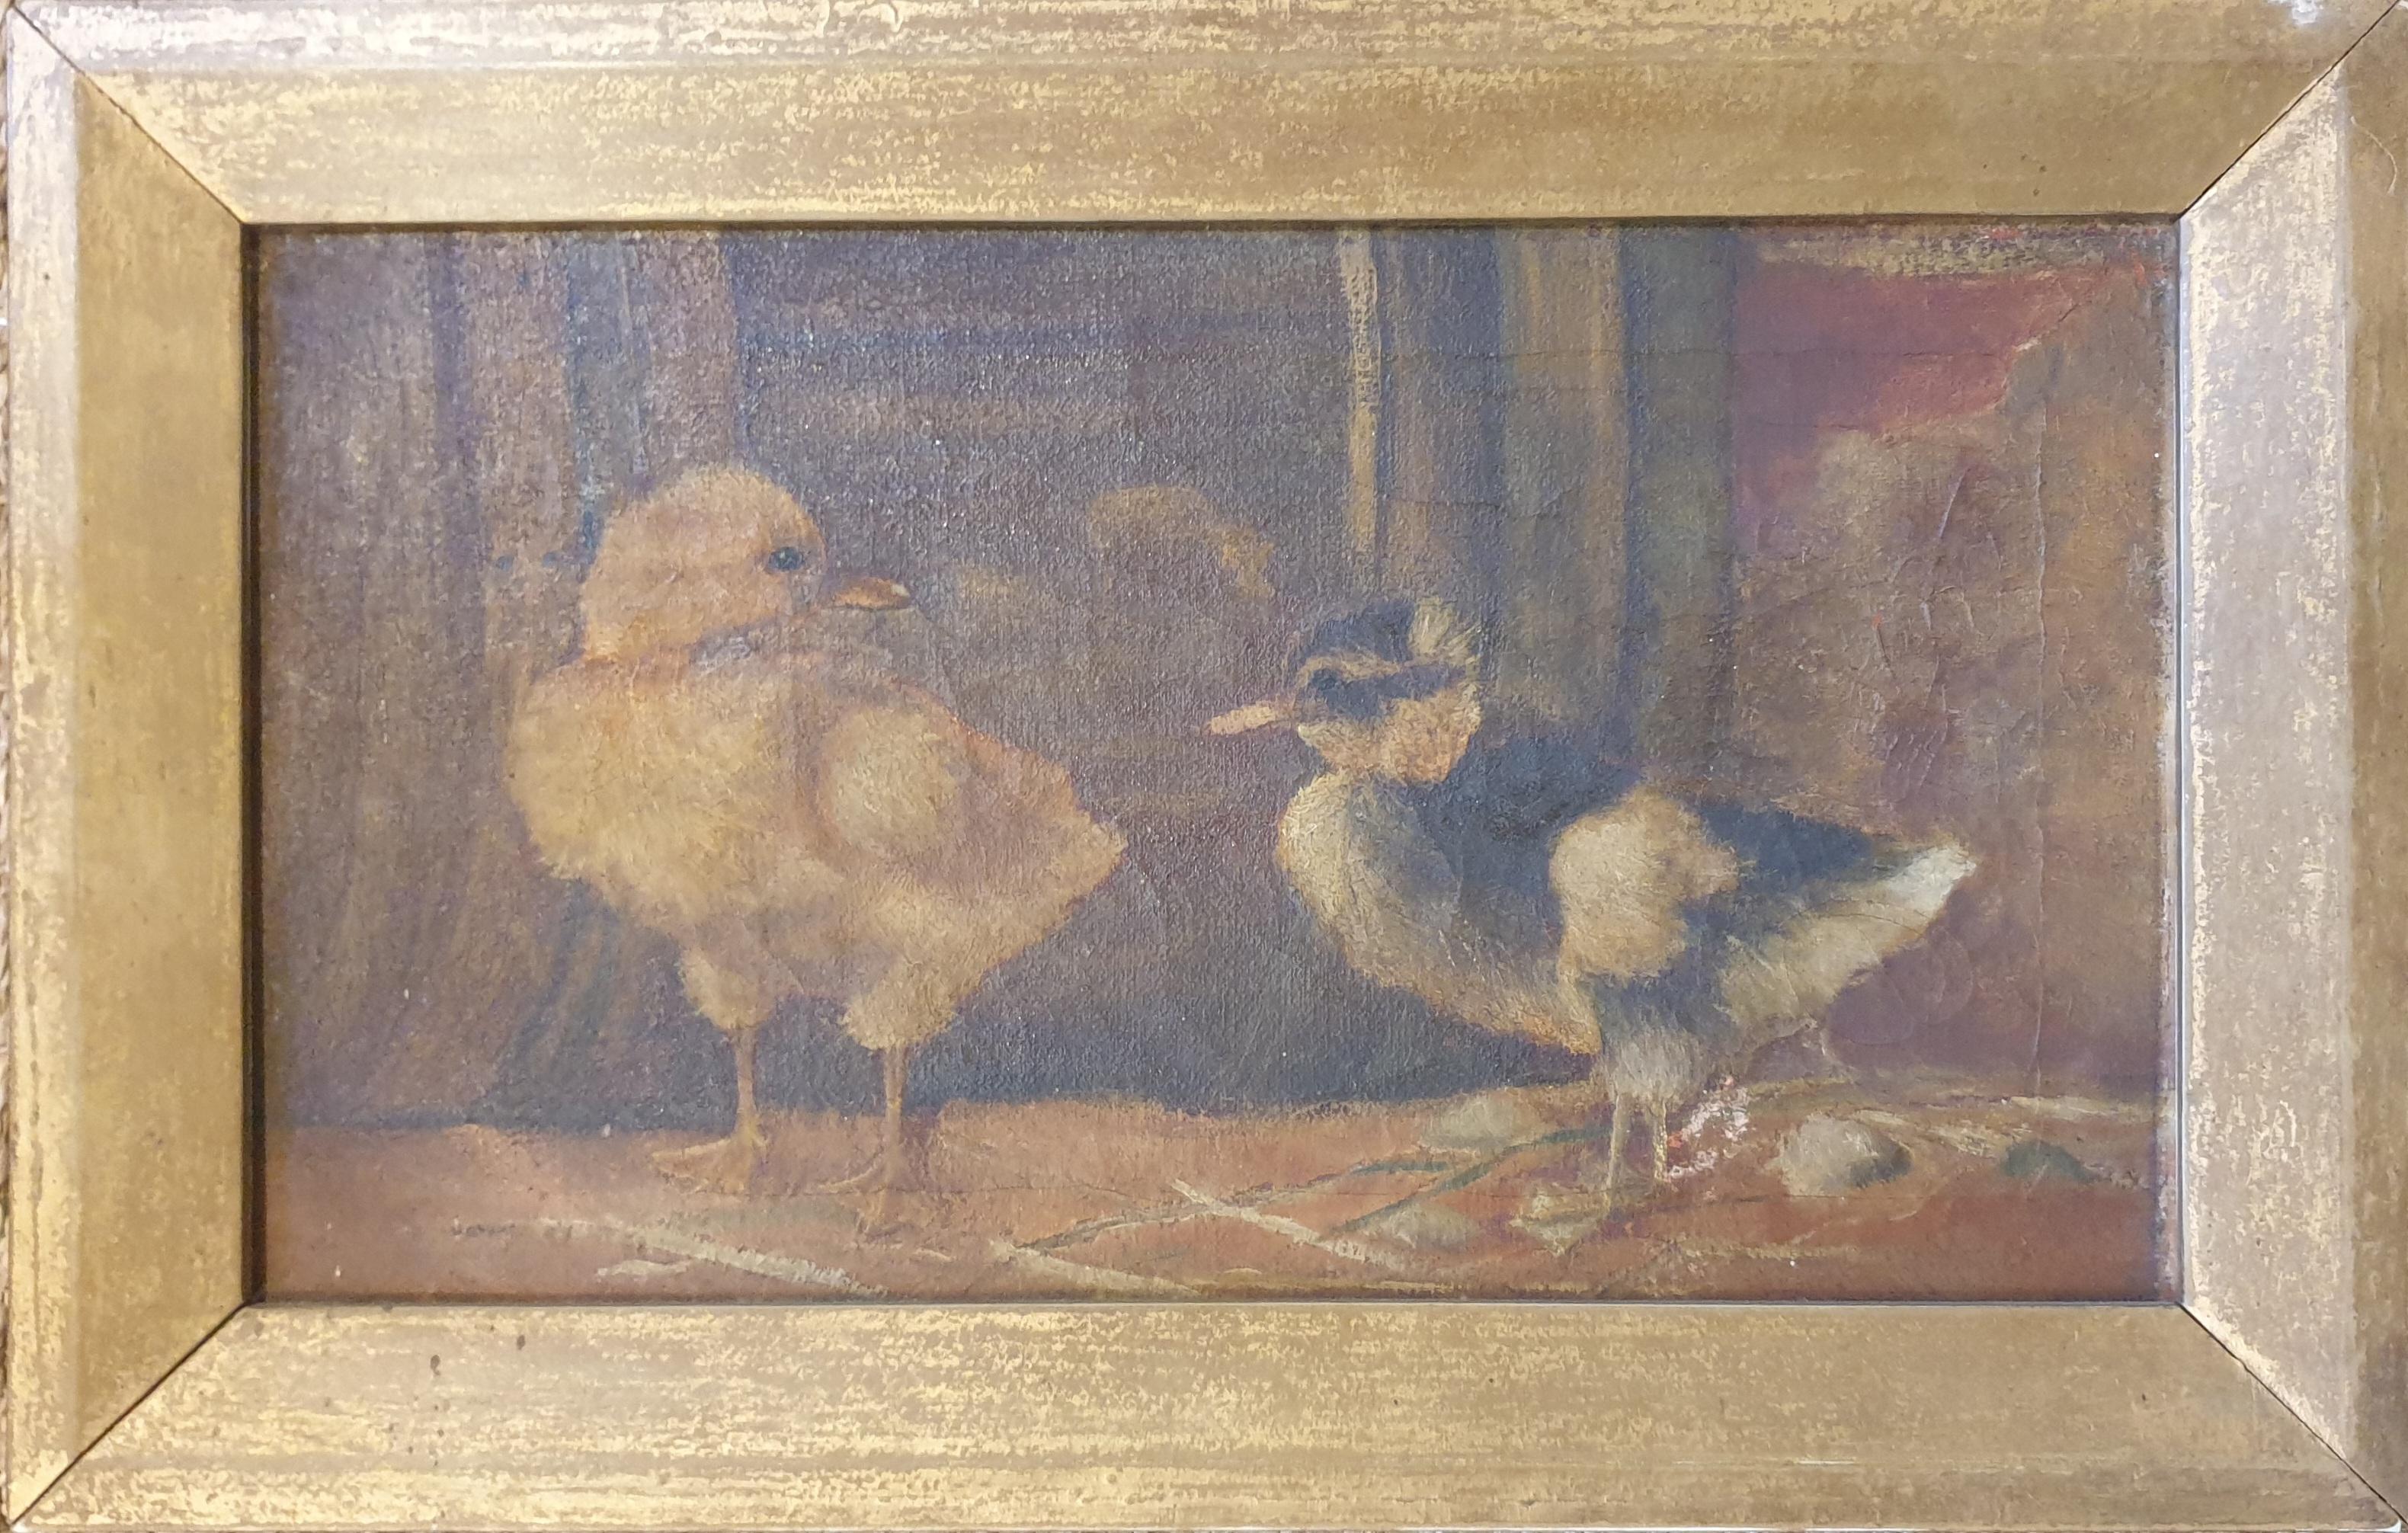 Charming late 19th century oil on canvas of a pair of ducklings. Presented in a wooden gold frame. Unsigned. The stretcher with 'keys'.

A warm and inviting painting beautifully executed and in great detail highlighting the soft downy feathers, the